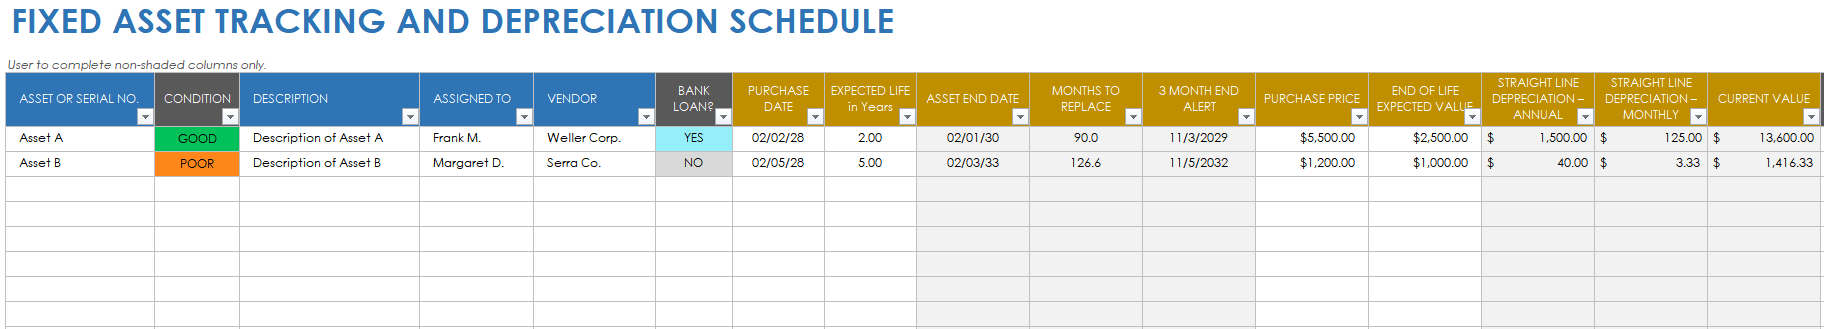 Fixed Asset Tracking Template with Depreciation Schedule